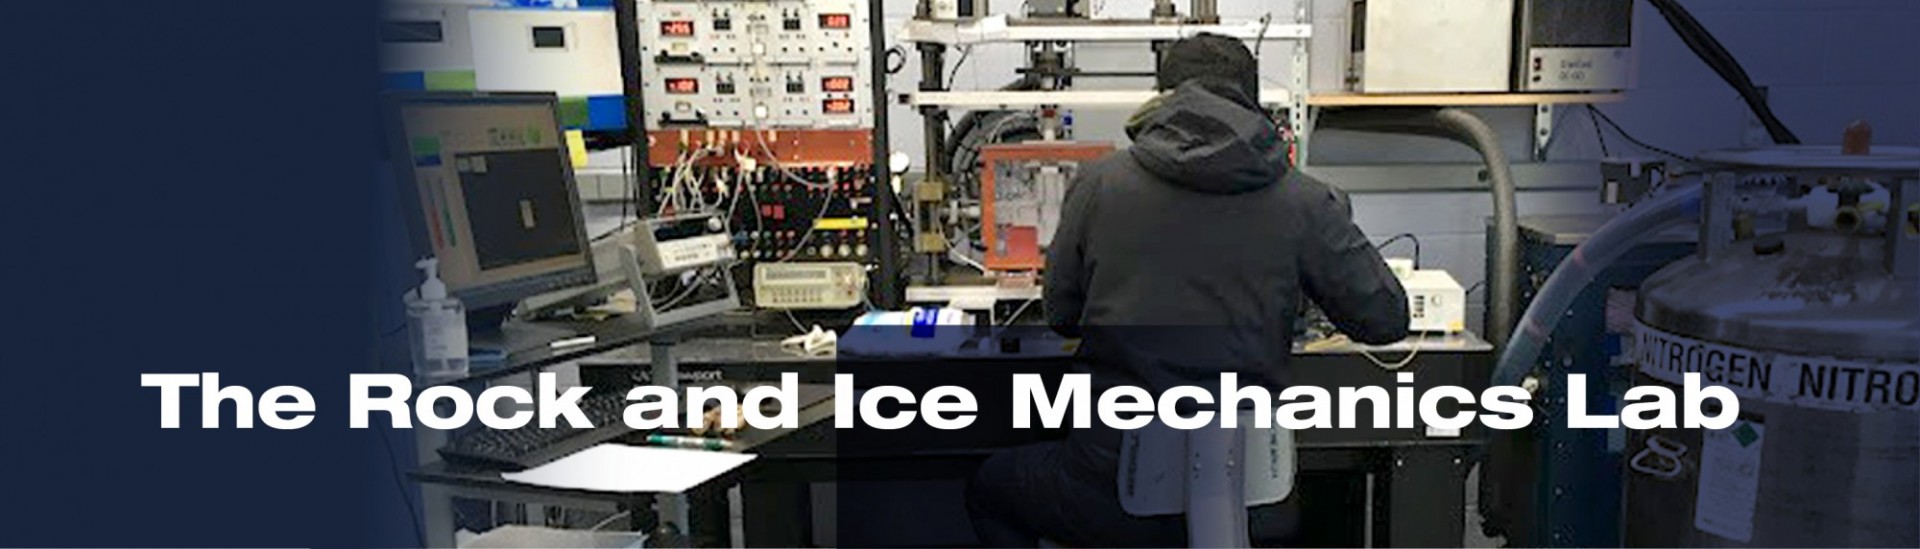 Rock and Ice Mechanics Lab  Lamont-Doherty Earth Observatory